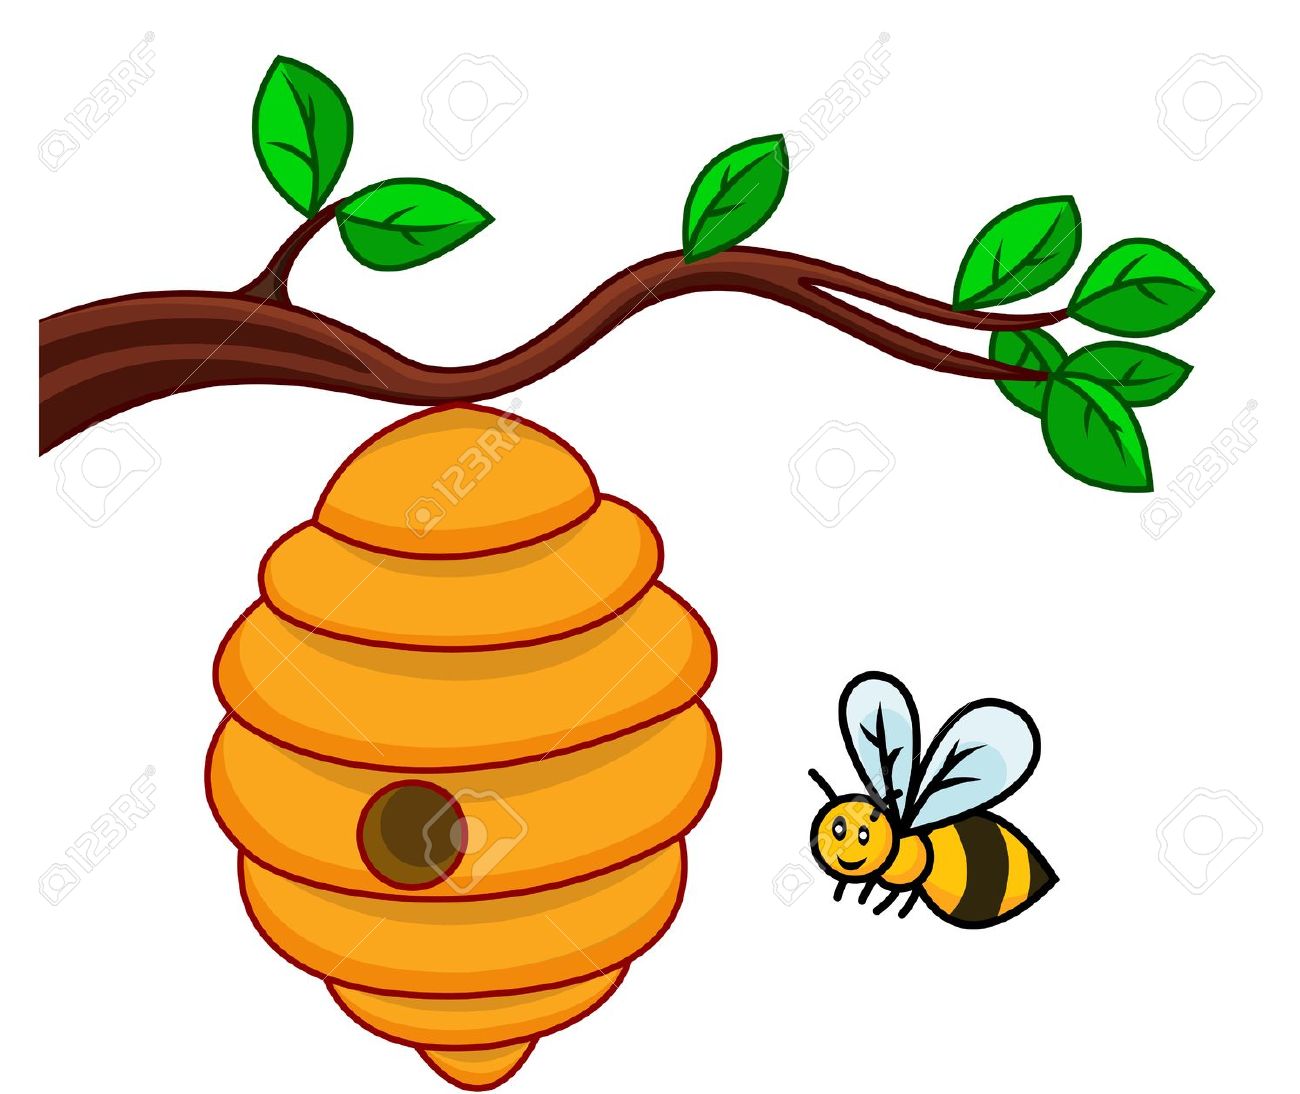 BEES AND HIVE CLIP ART